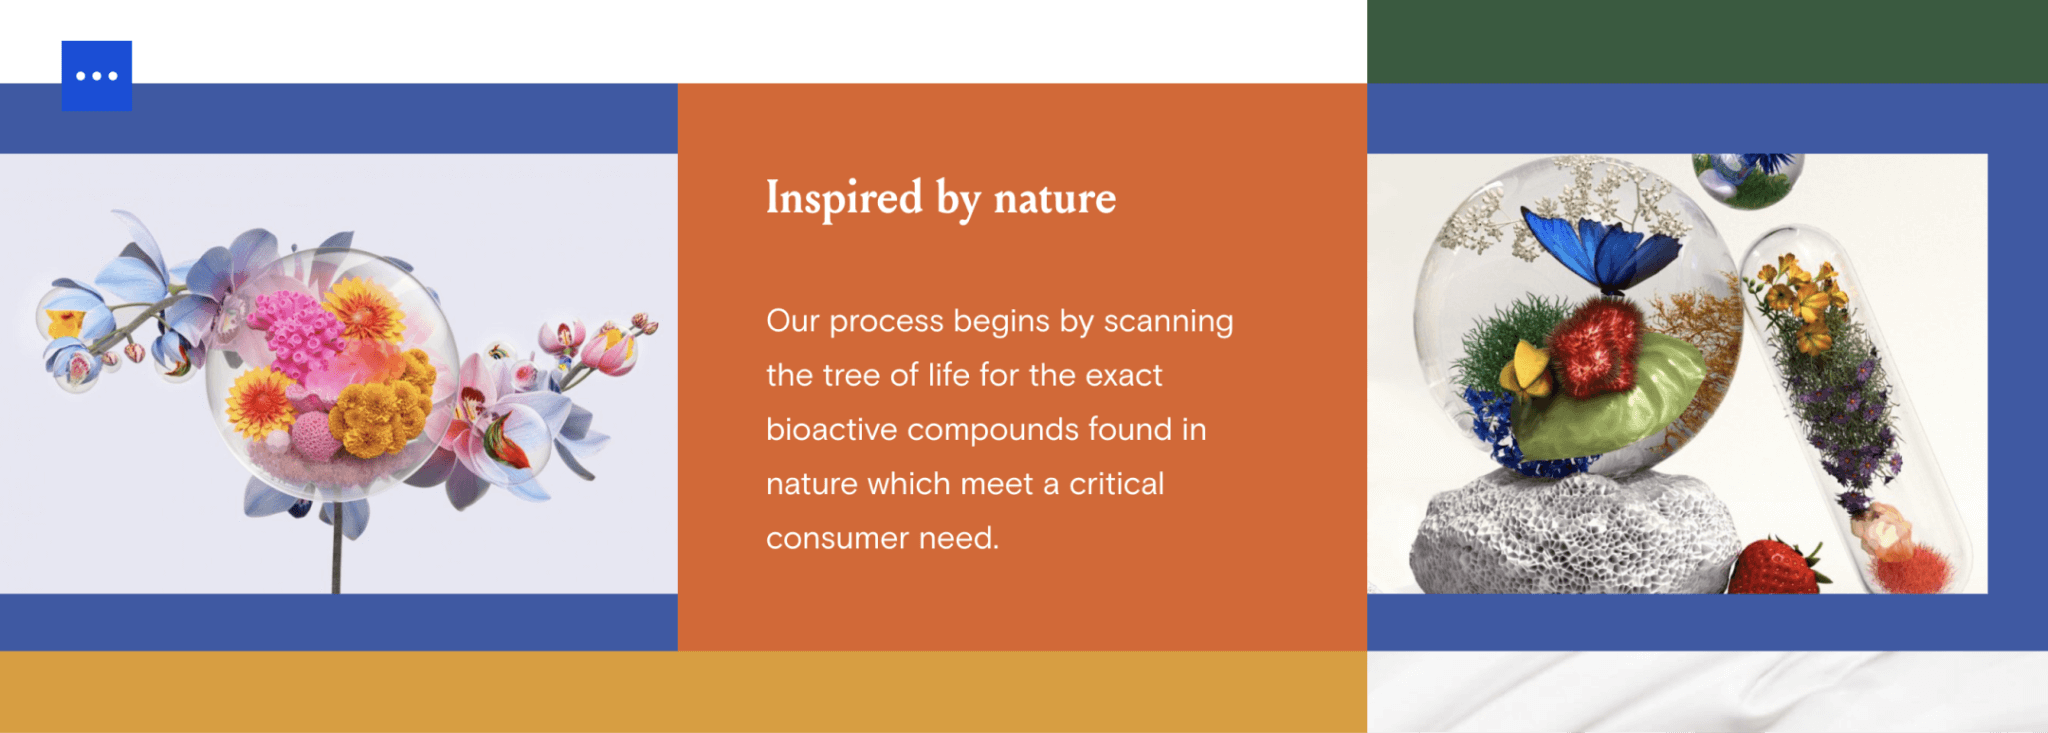 A page from Geltor website inspired by nature